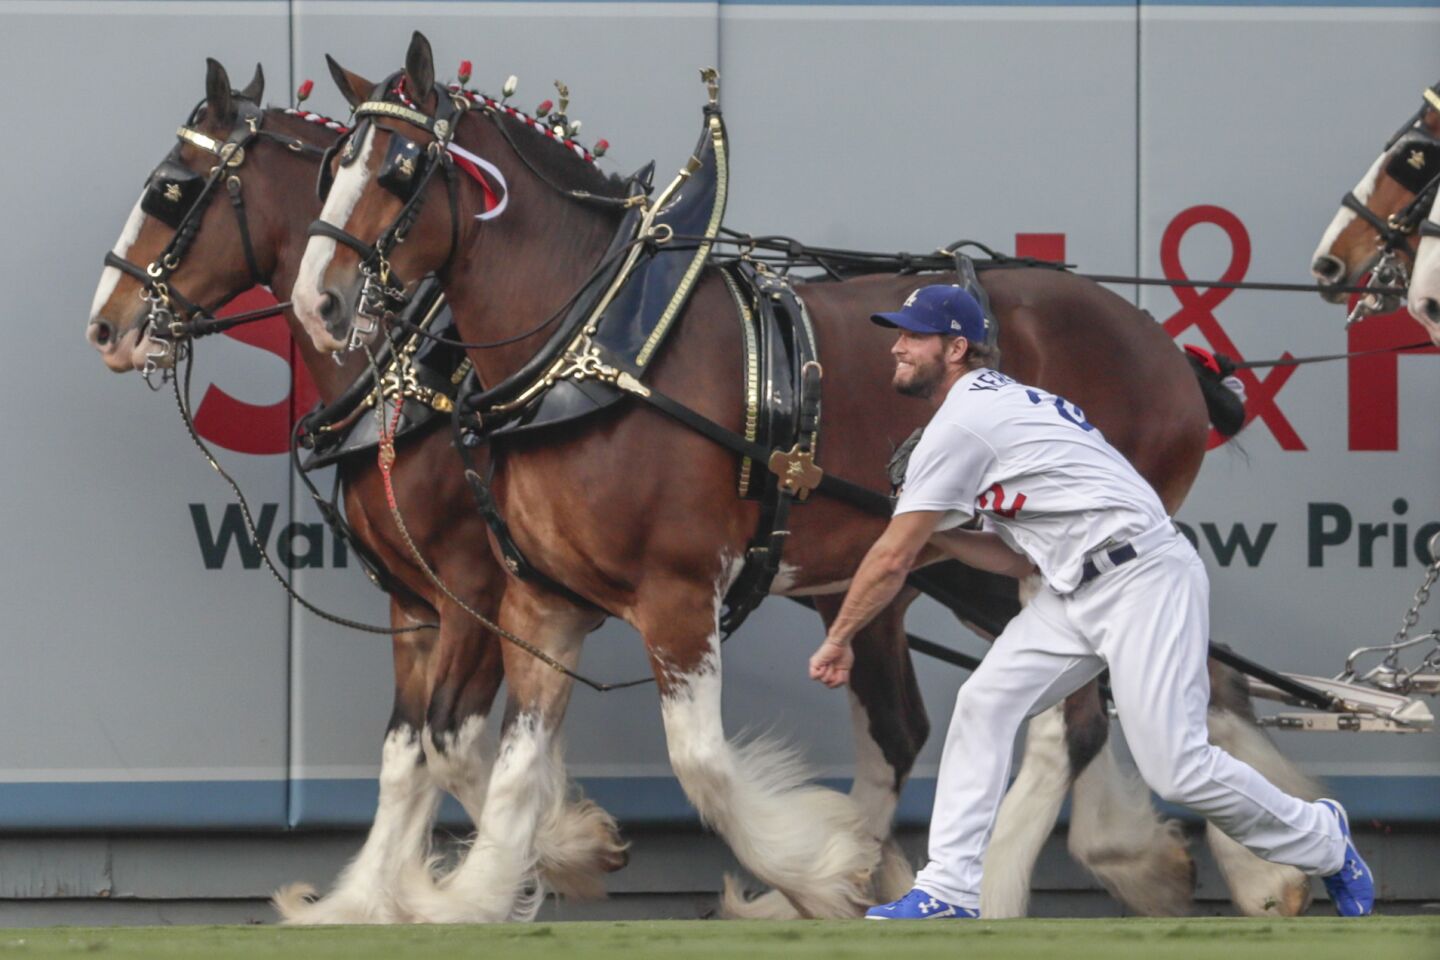 Dodgers starting pitcher Clayton Kershaw warms up in the outfield as the Budweiser Clydesdales pass by before the start of Game 5 at Dodger Stadium.